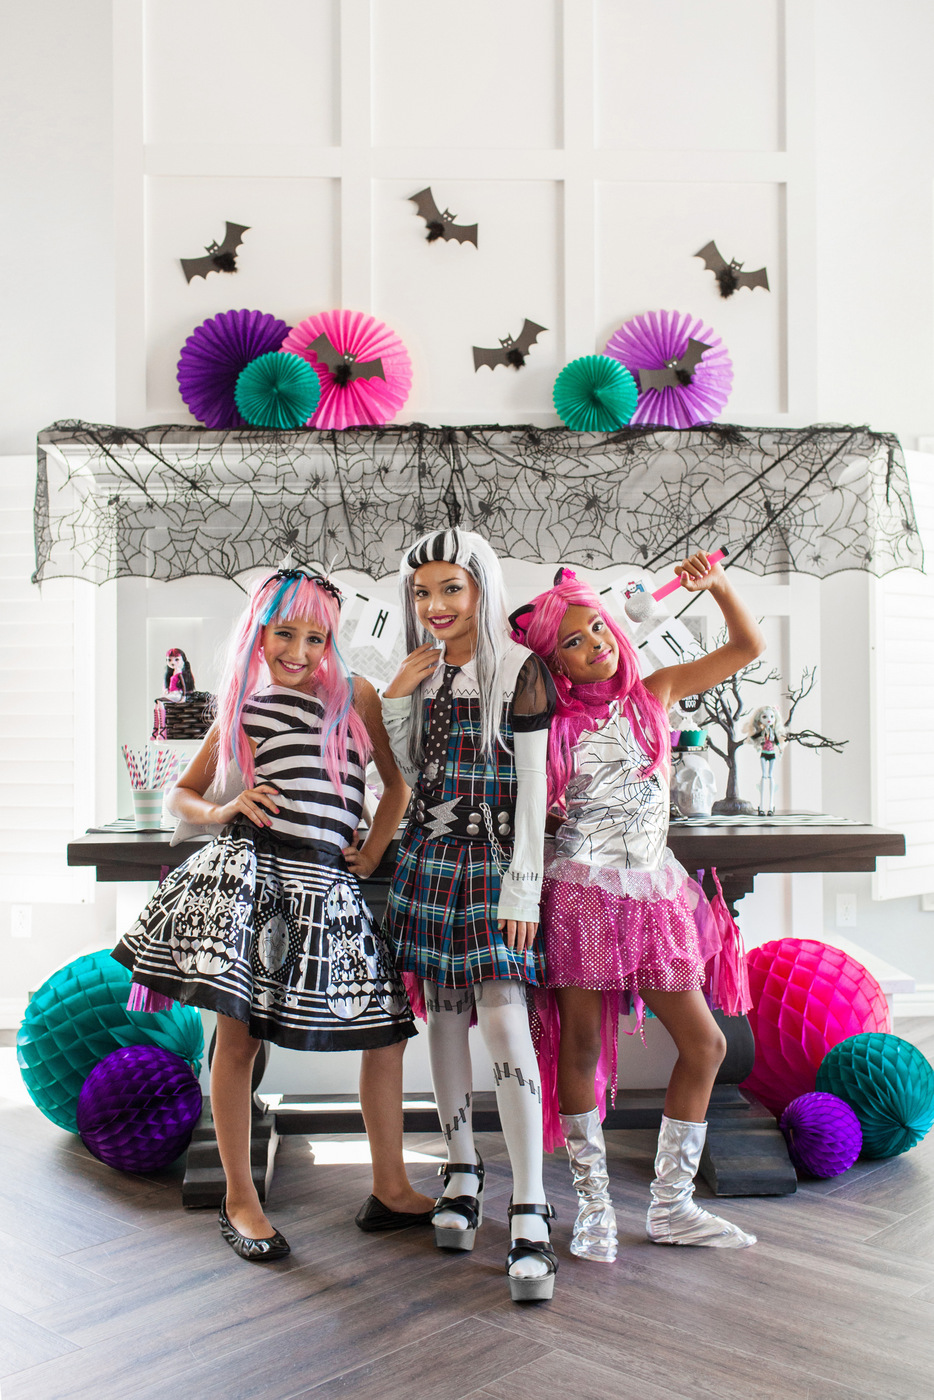 Monster High Costume Party - The TomKat Studio